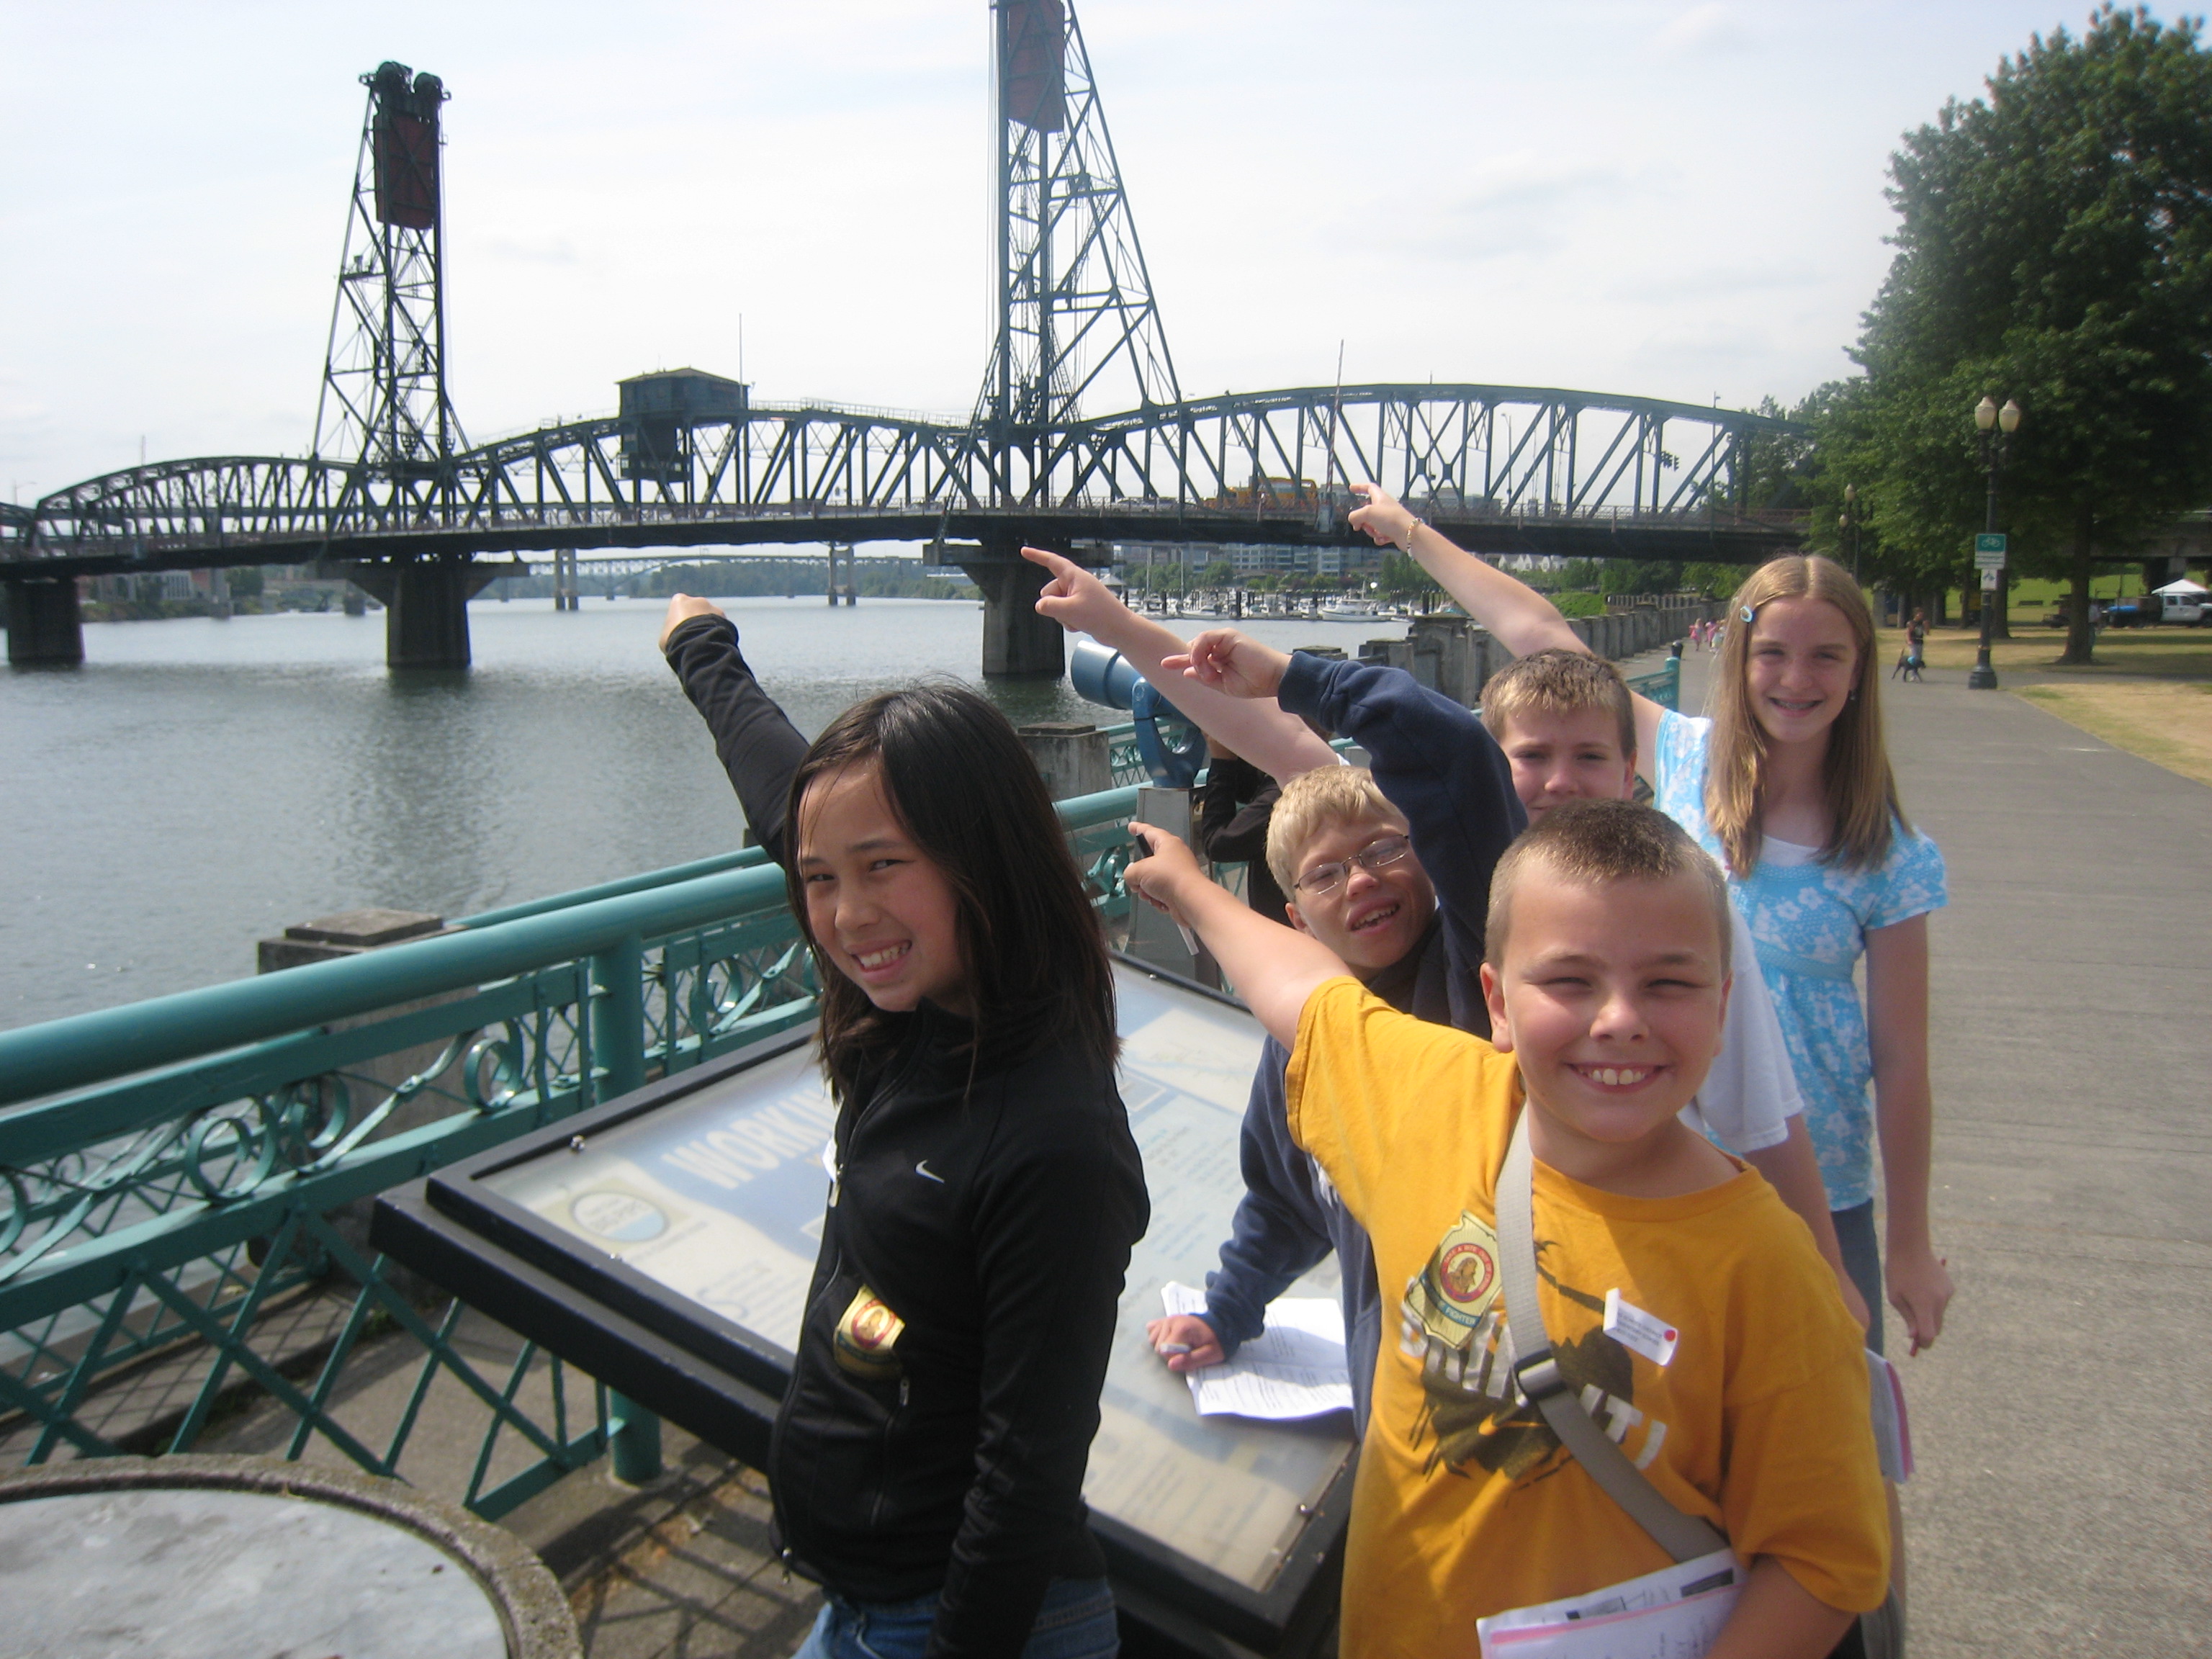 small group of children pointing at bridge over a river